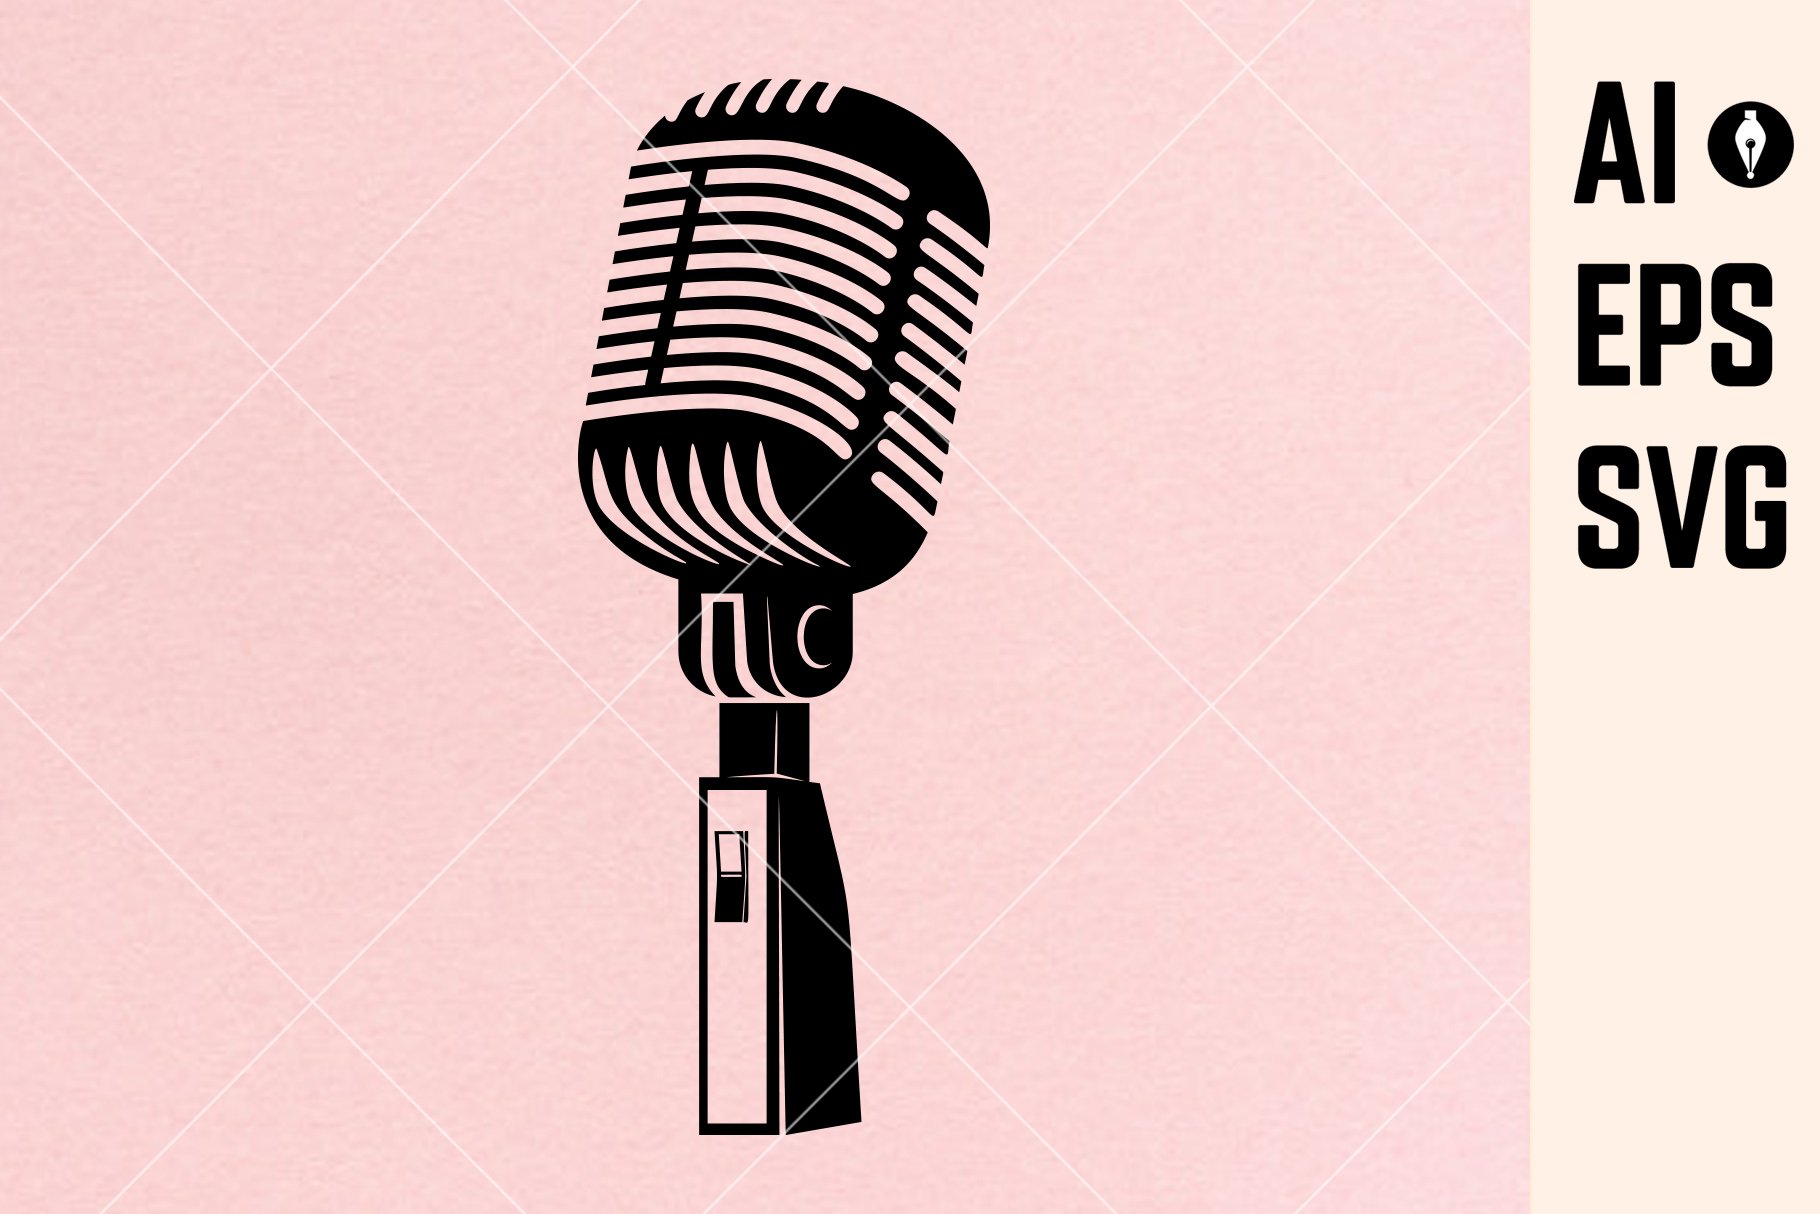 Nice retro microphone on a light pink background.